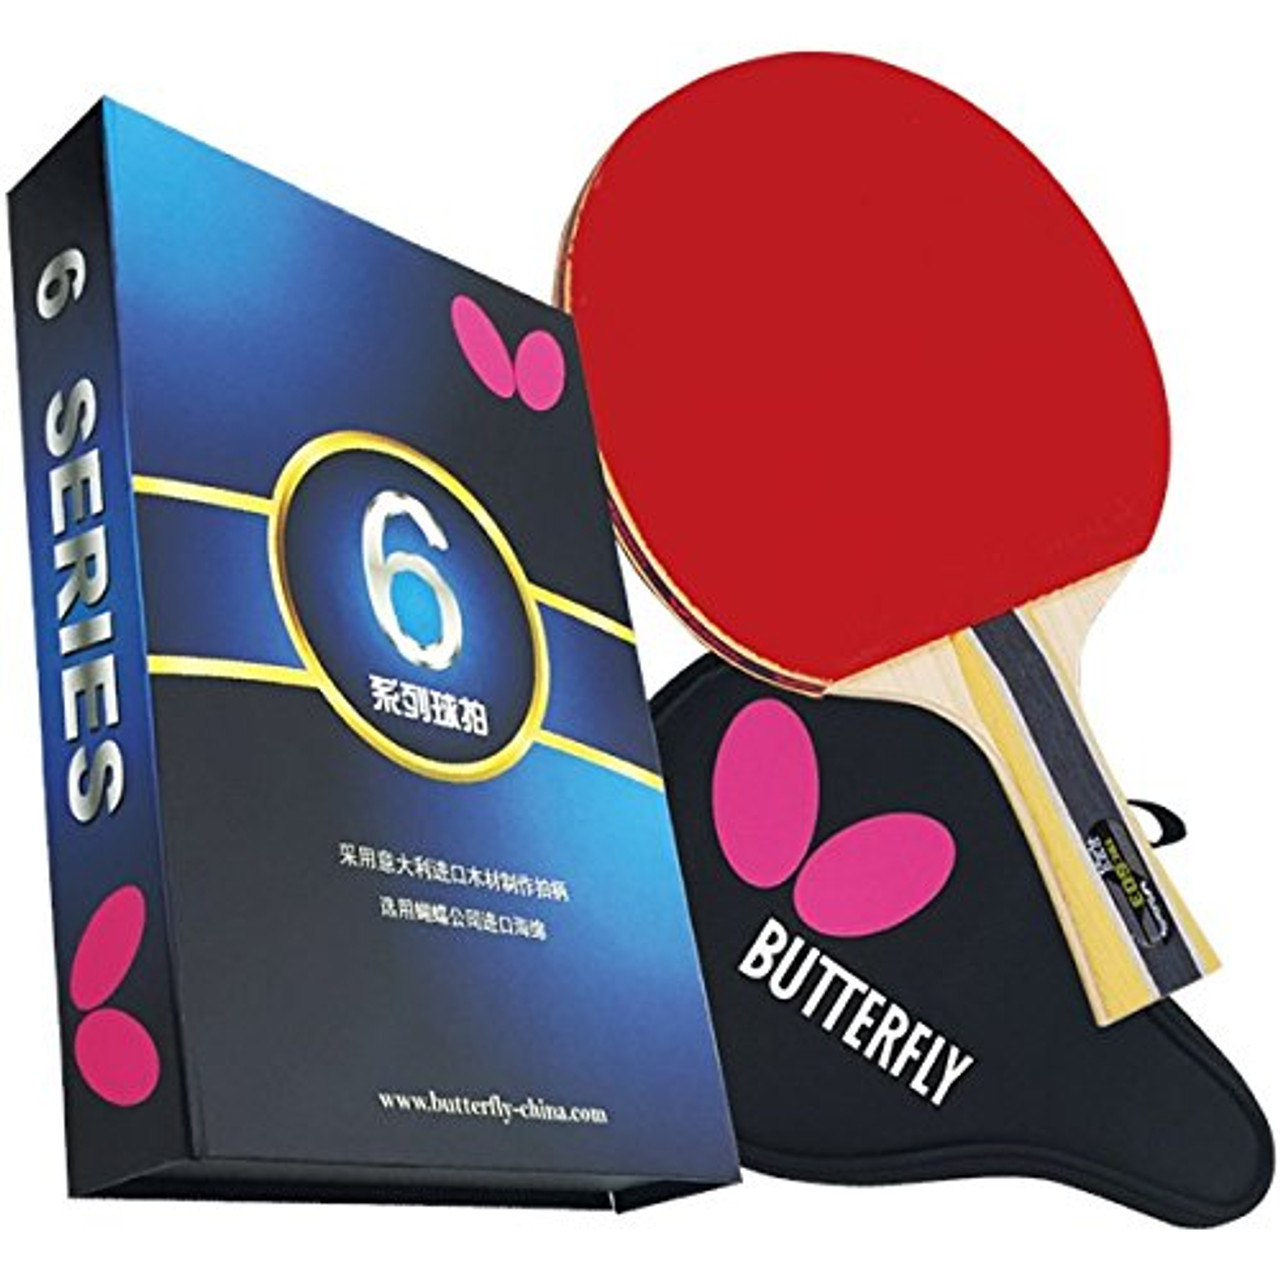 Butterfly 603 Racket With Case For Sale Billiard Wholesale